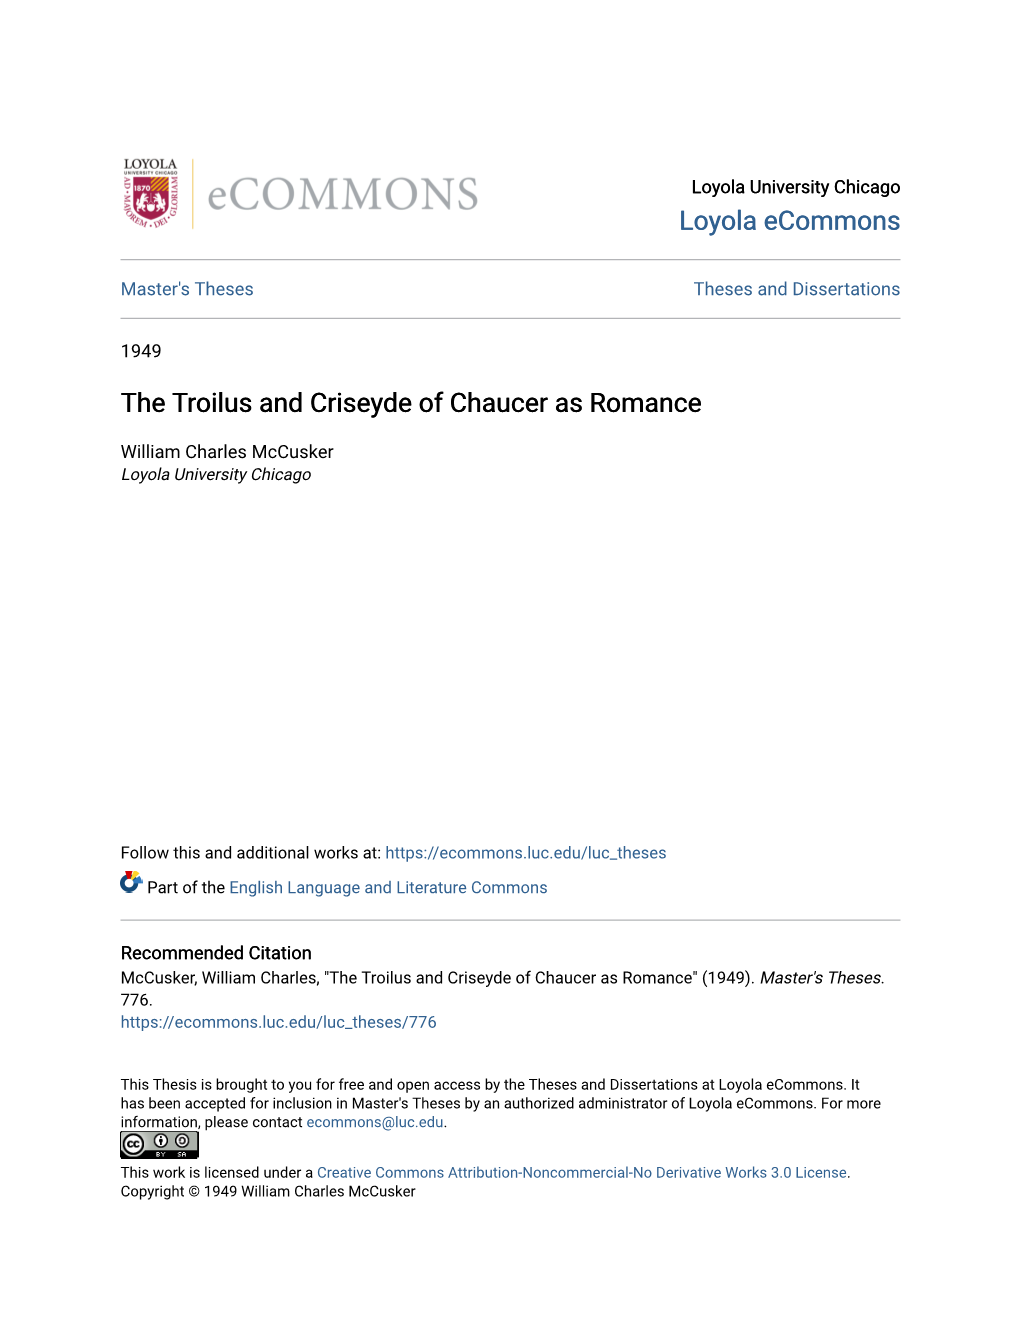 The Troilus and Criseyde of Chaucer As Romance